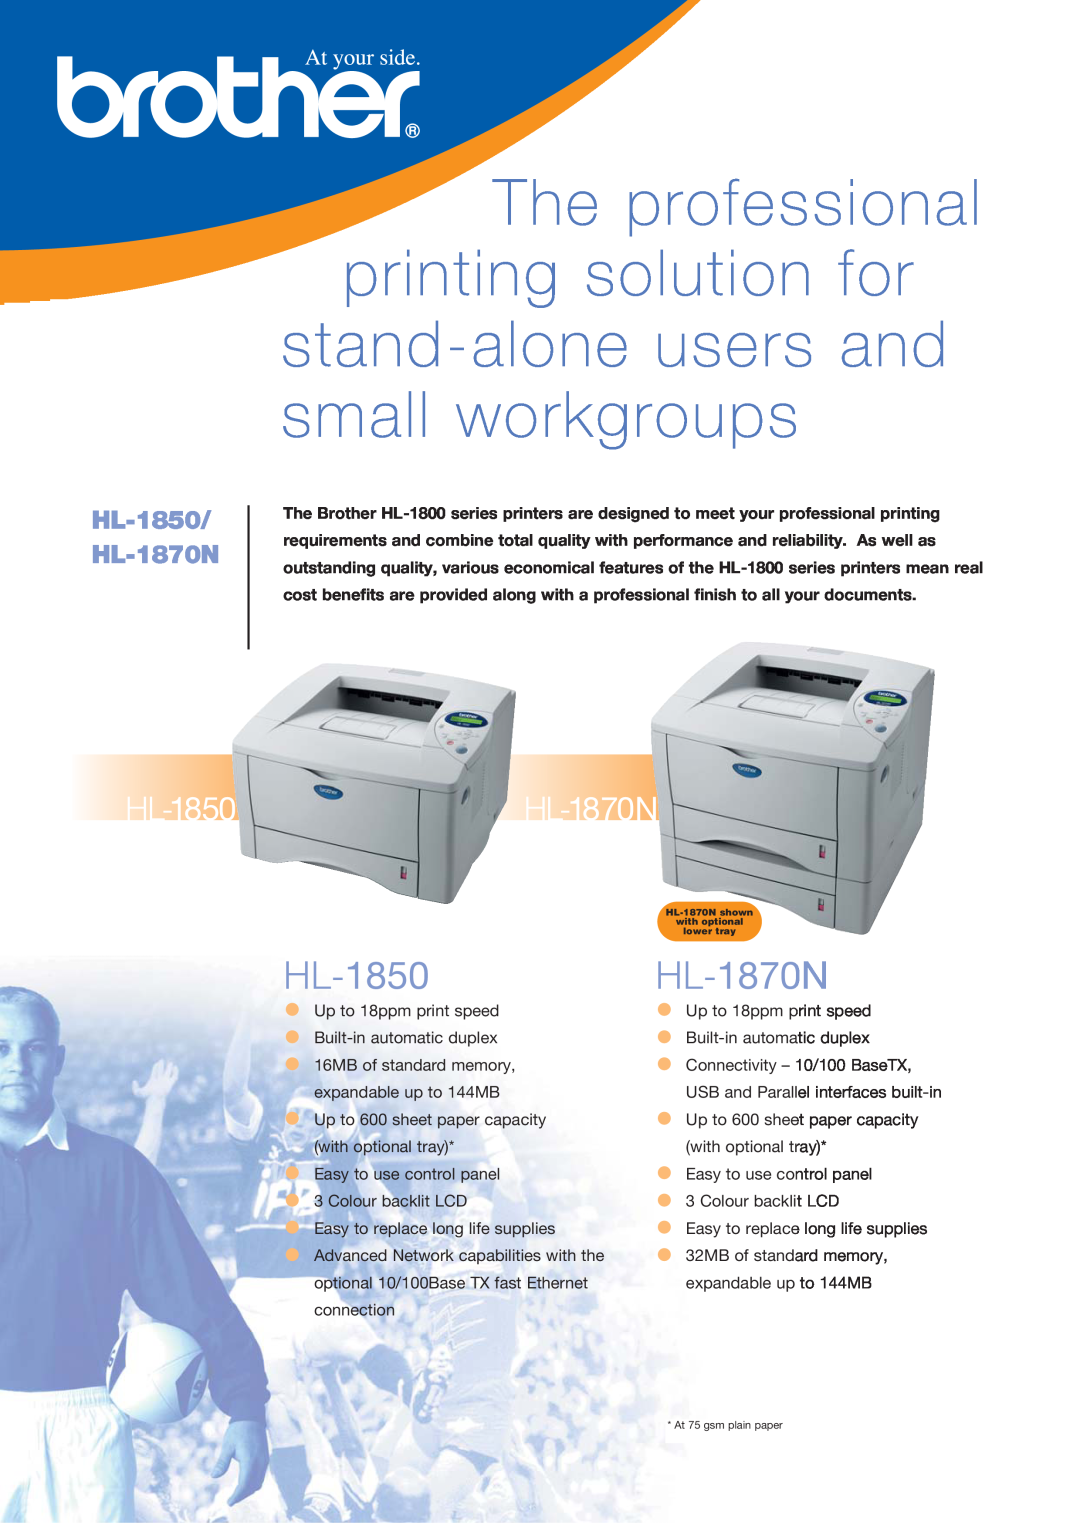 Brother HL-1850, HL1870N manual HL-1870N, The professional printing solution for, stand-alone users and small workgroups 